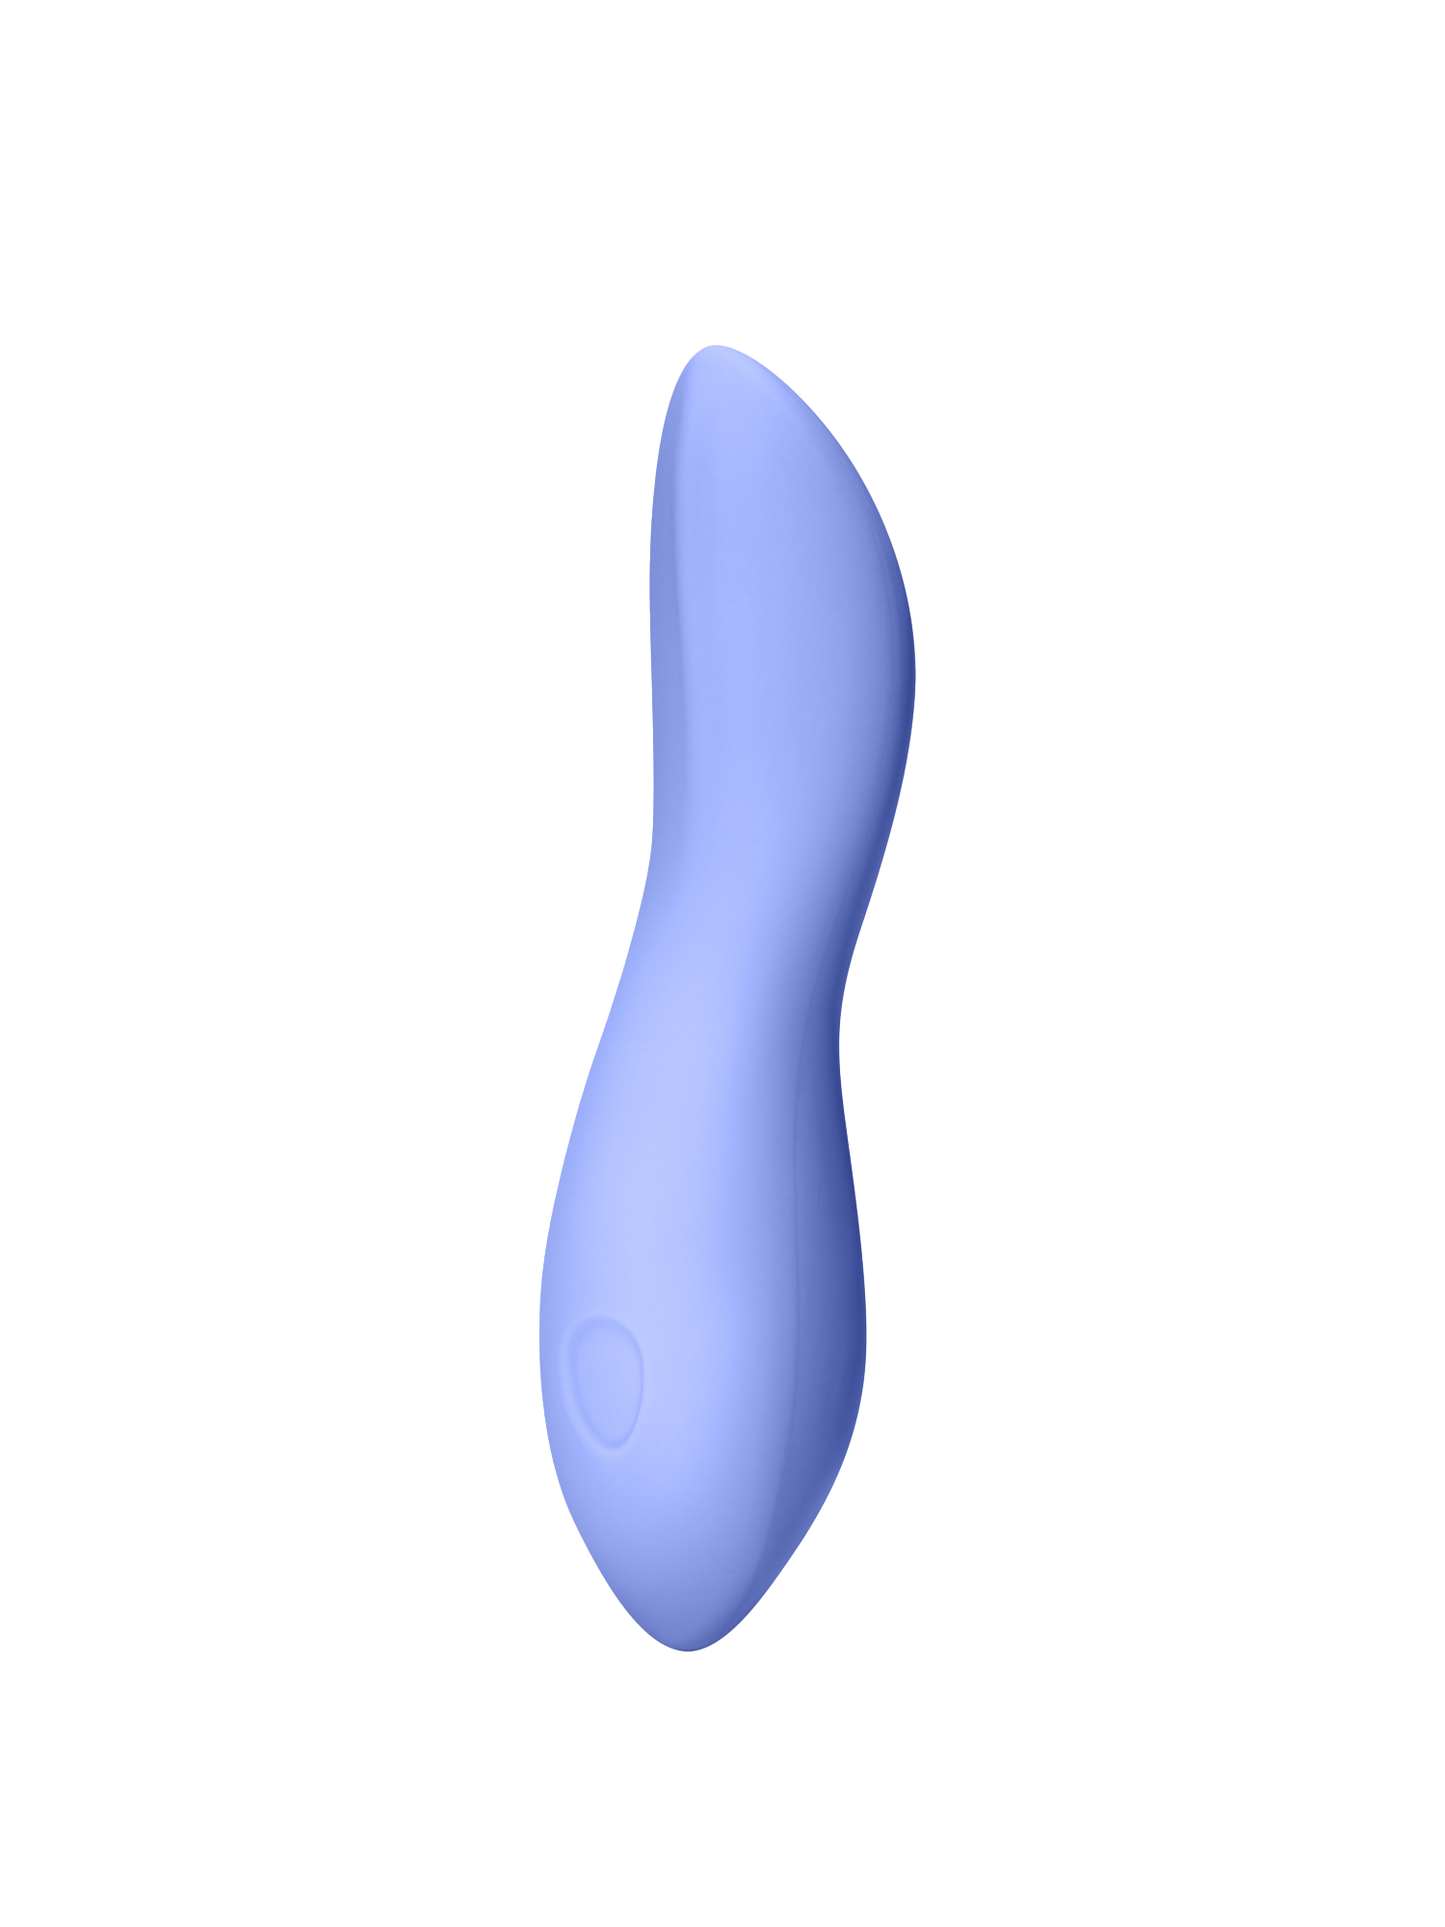 Periwinkle  | Seamless | Light blue vibrator at 45 degree angle, against off-white background